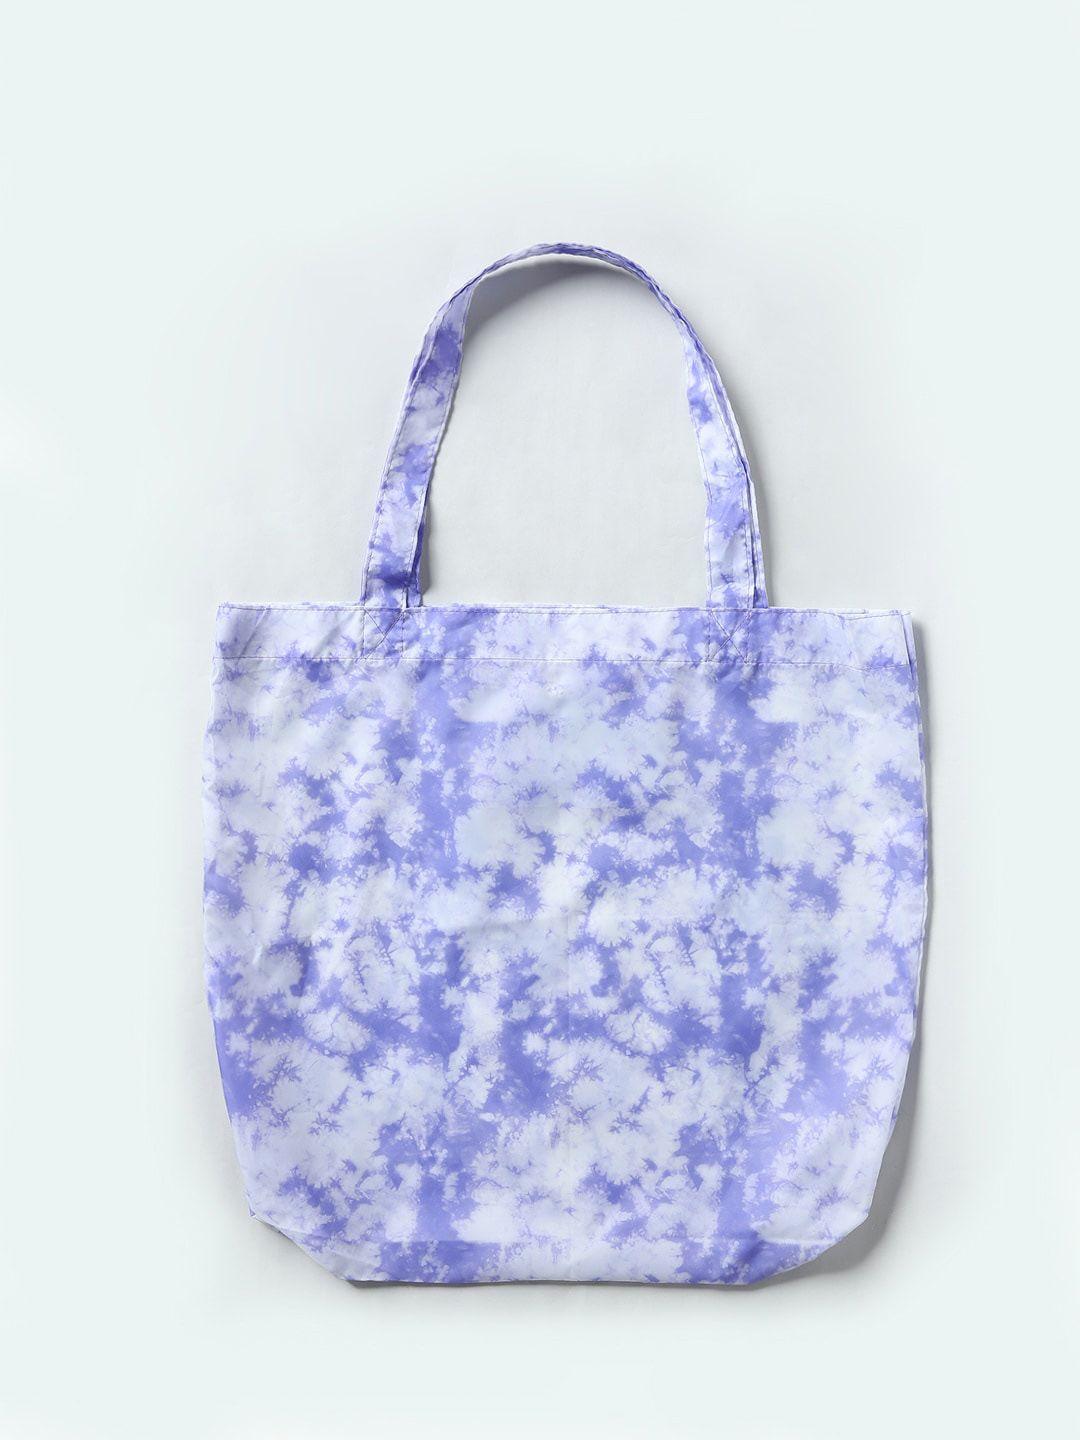 only purple & white oversized shopper tote bag